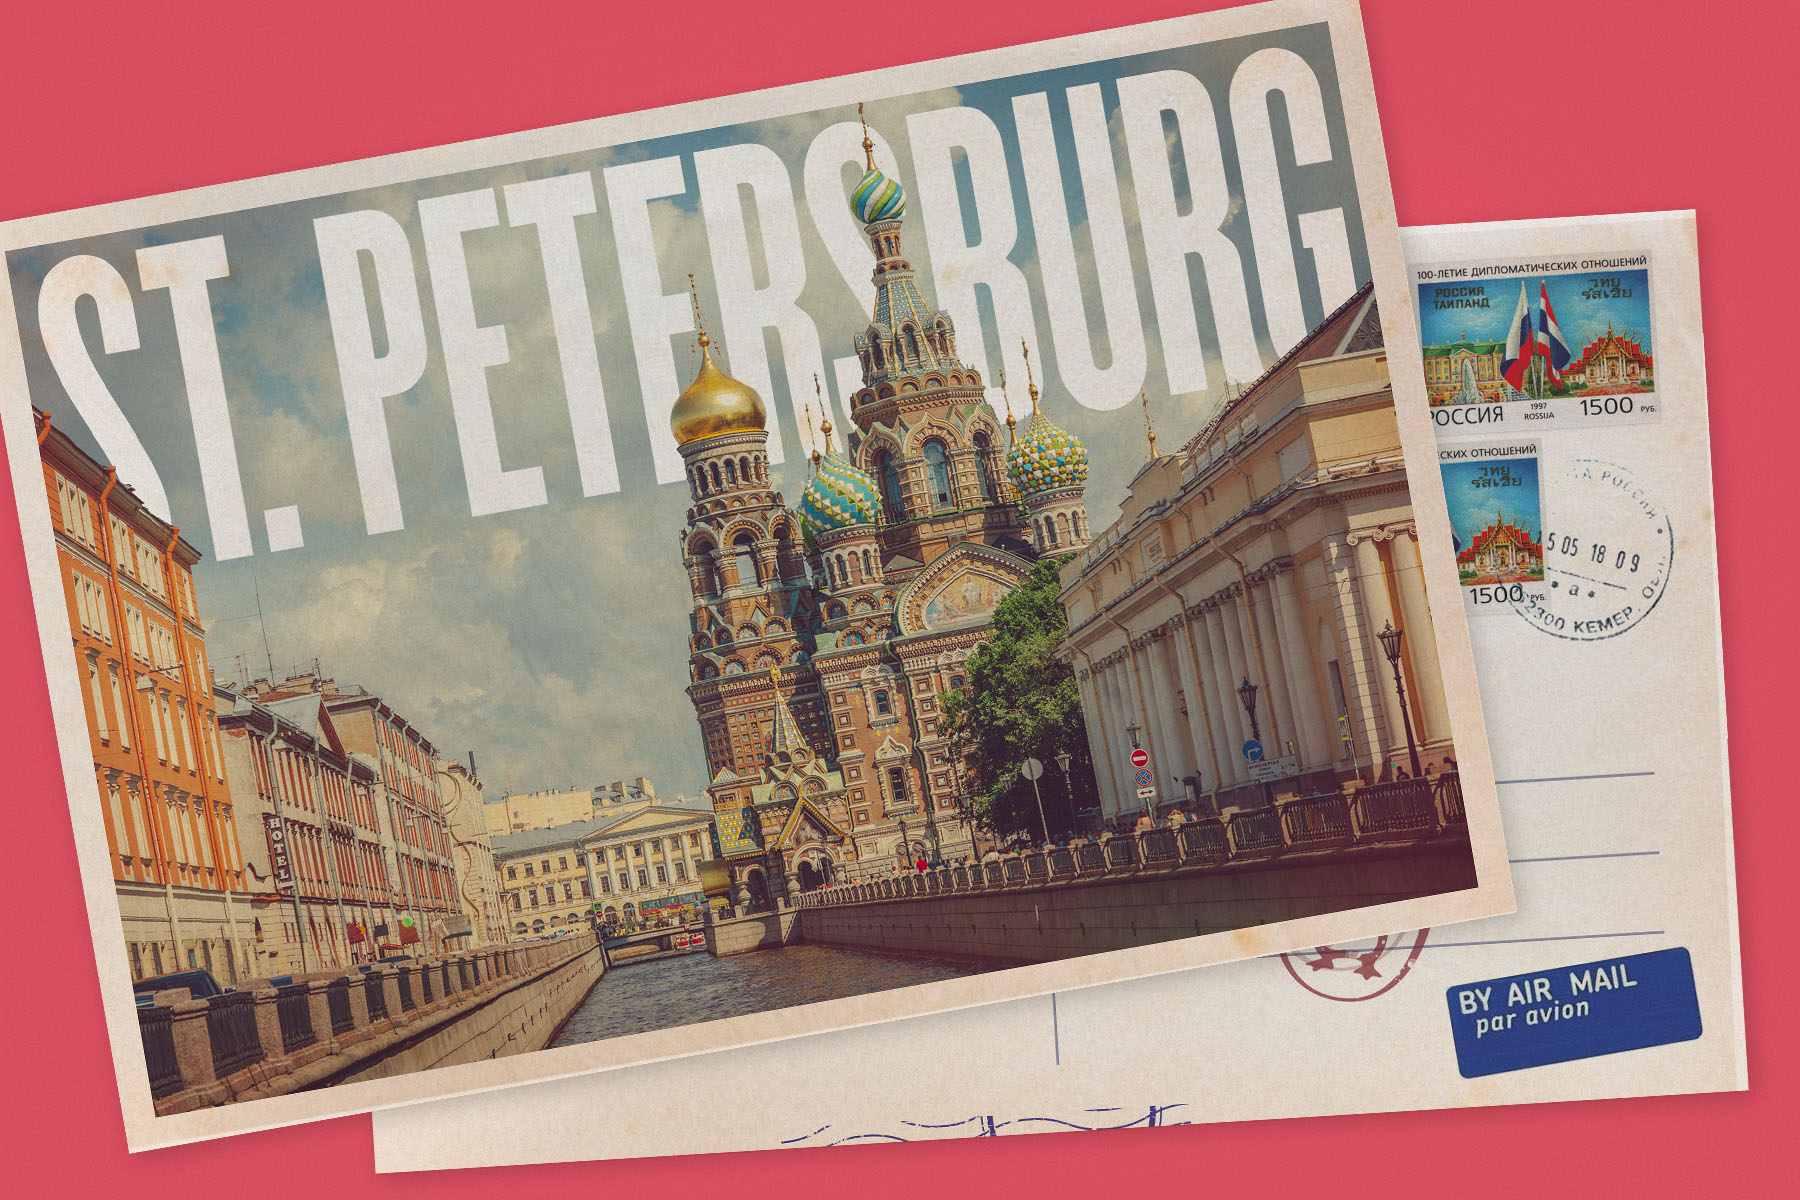 A reading list for anyone travelling to St. Petersburg.